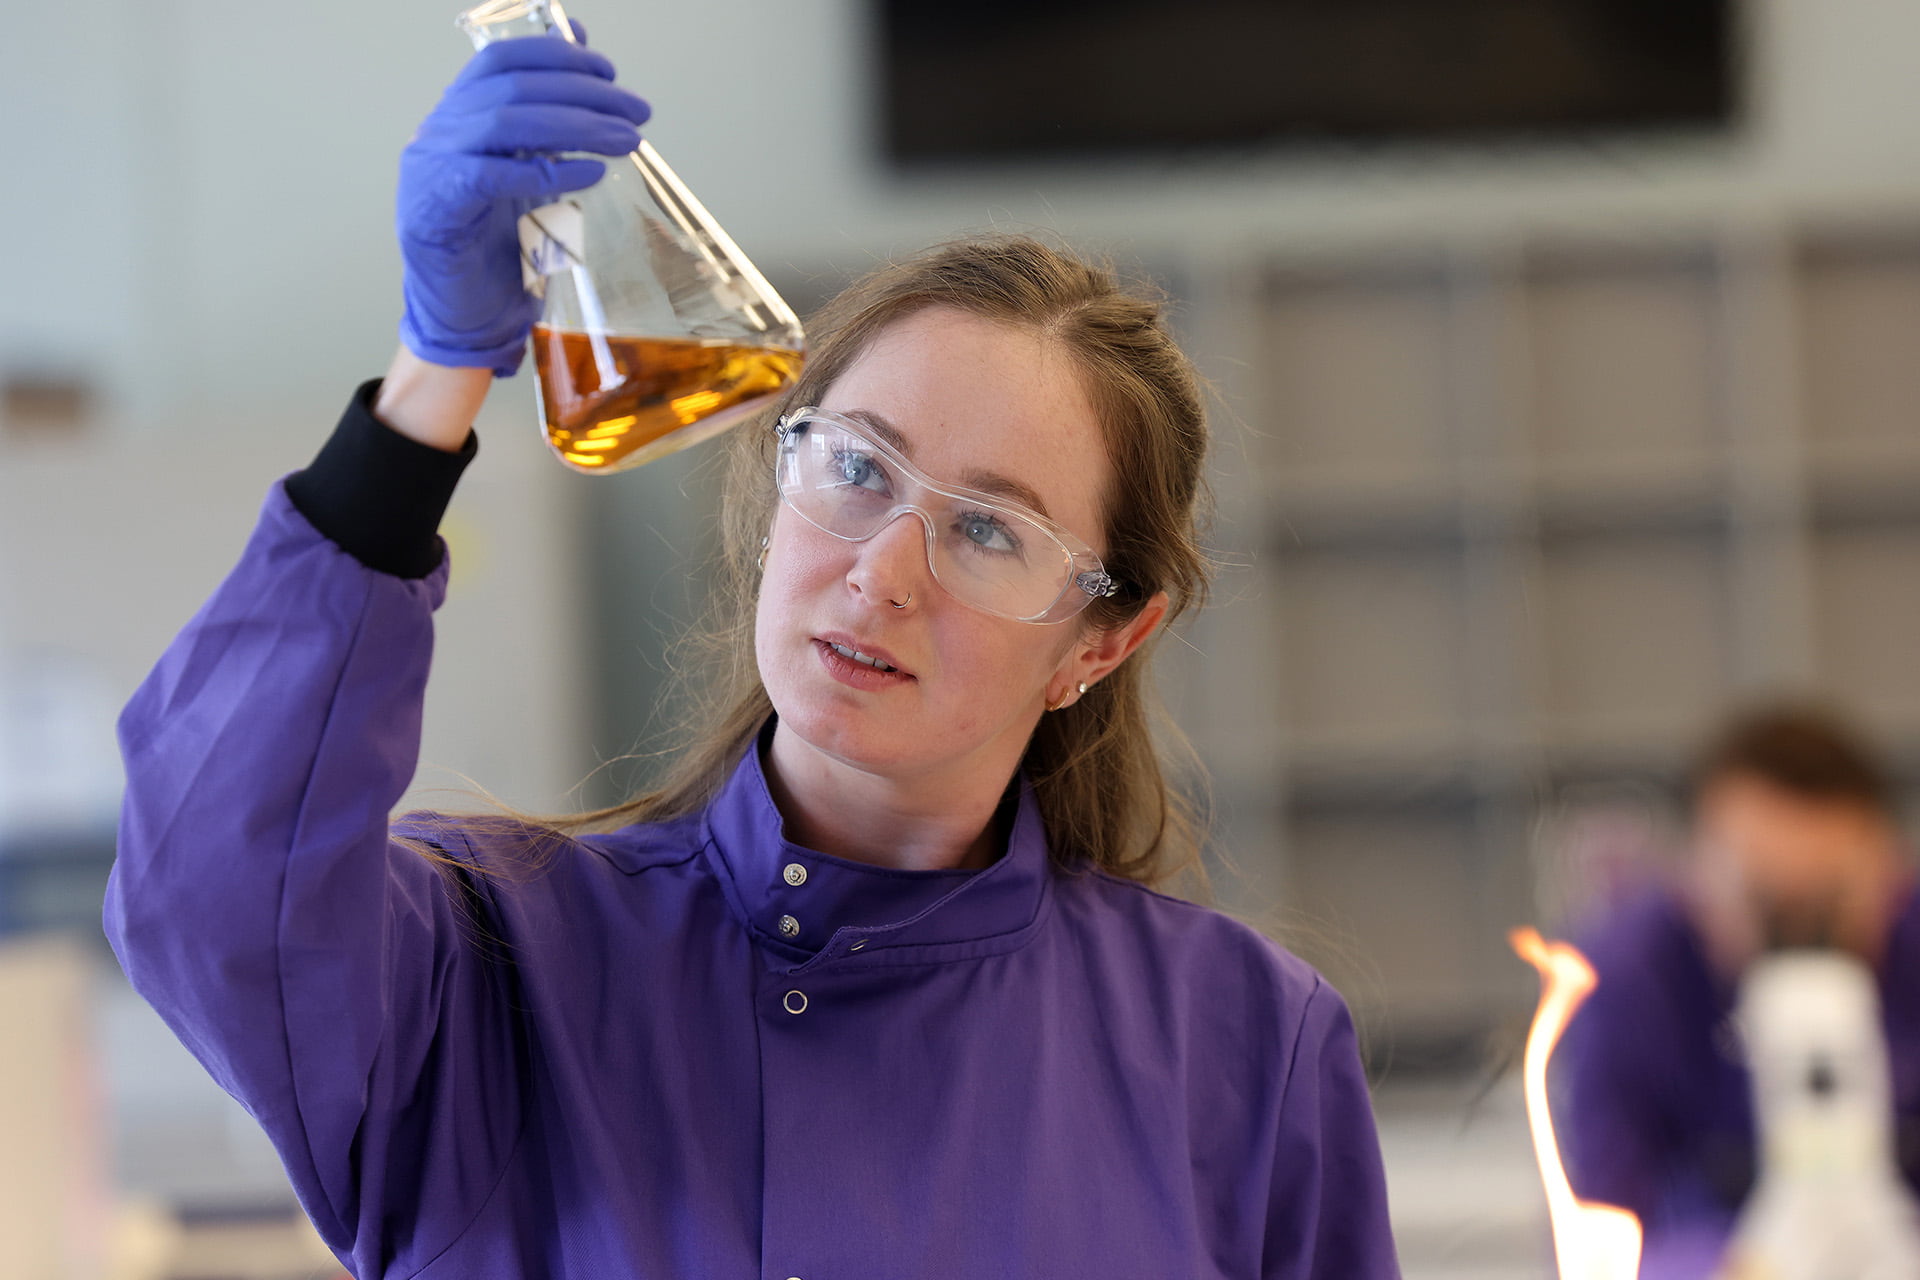 Female chemist in a lab looking at solution in a beaker